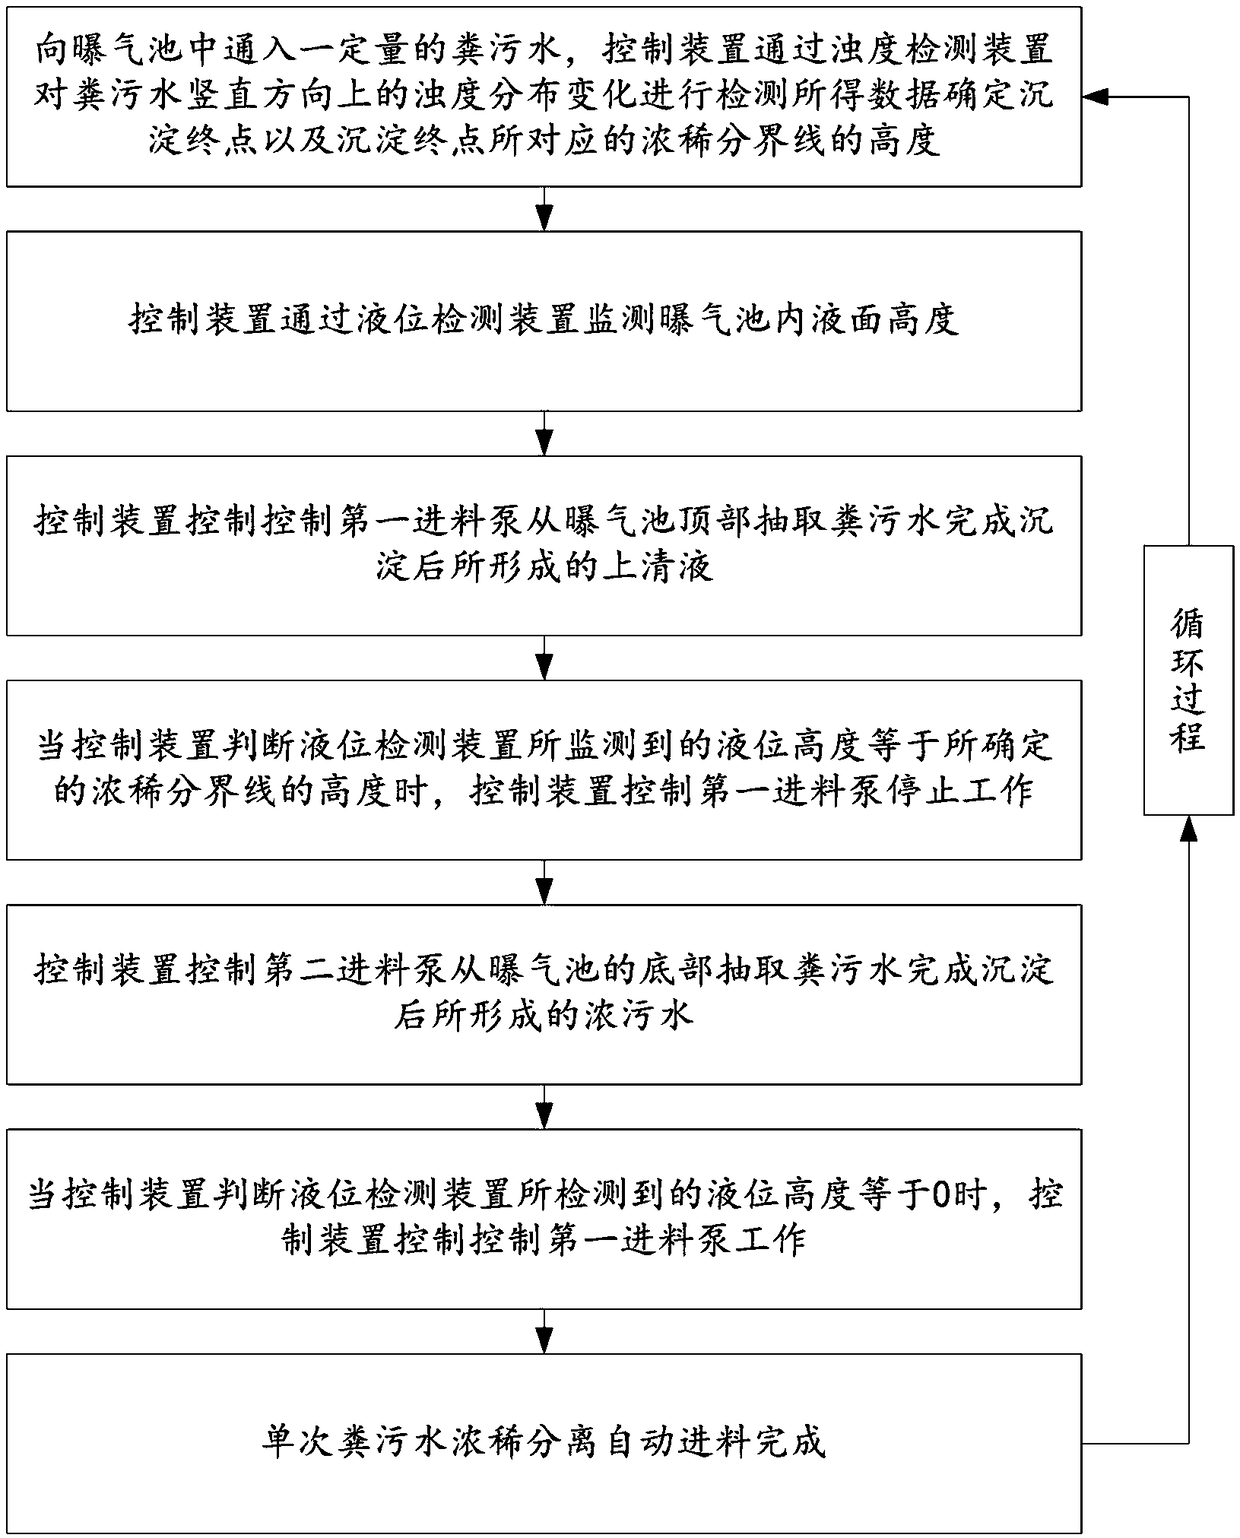 Anaerobic fermentation feeding method capable of realizing aeration dense and dilute excrement sewage automatic separation